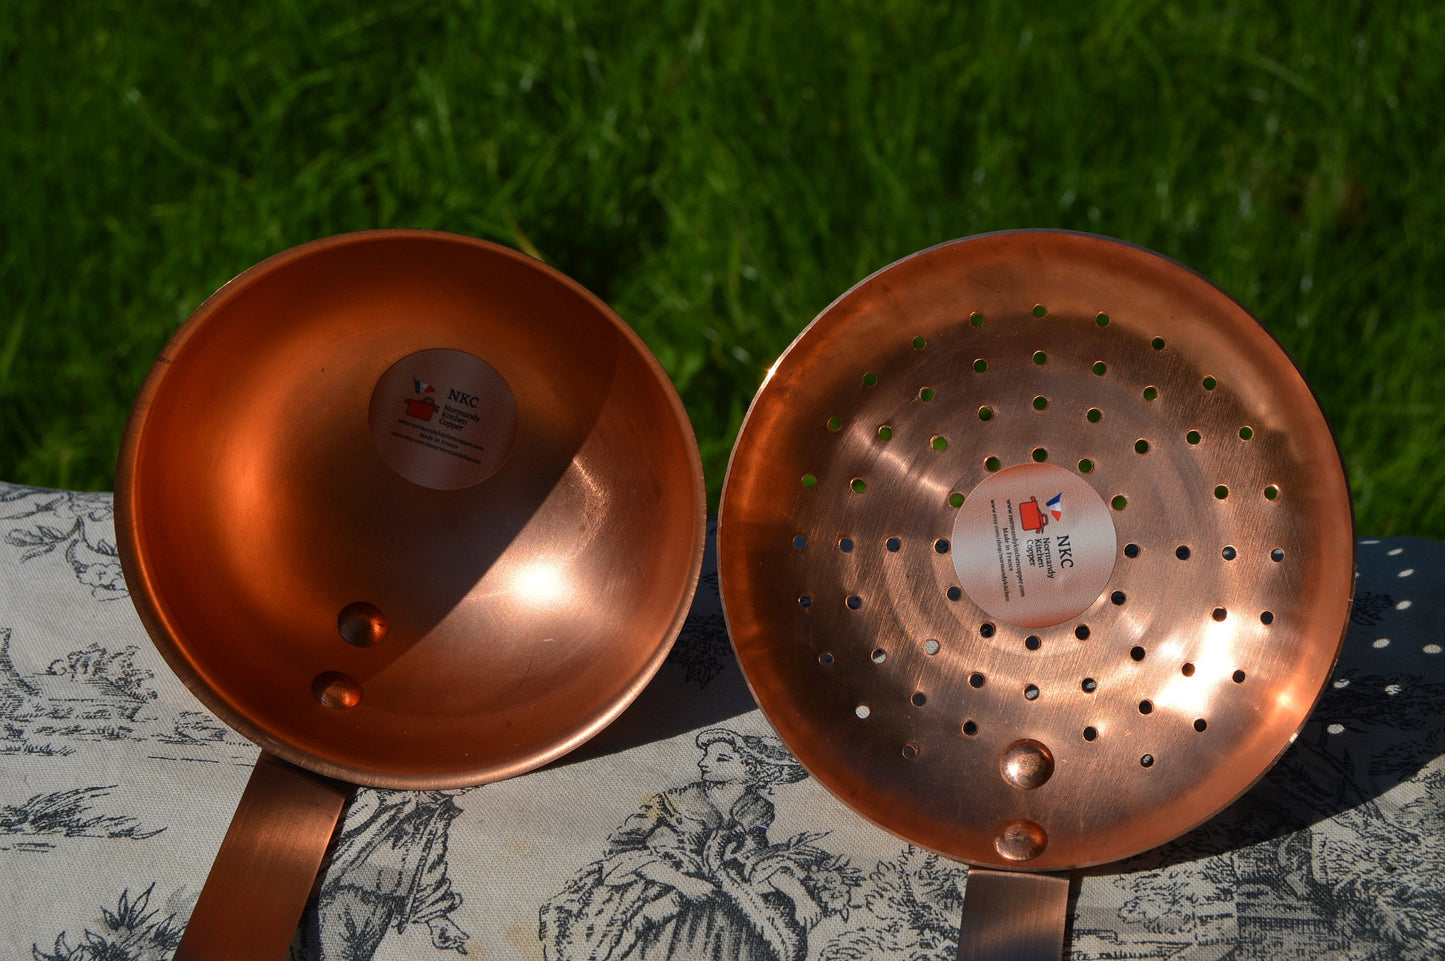 New NKC 28 cm Copper Jam Pan + Ladle + Ecumoire Skimmer Normandy Kitchen Copper Jam Jelly Pan 11" Rolled Top Stainless Steel Handles 28cm